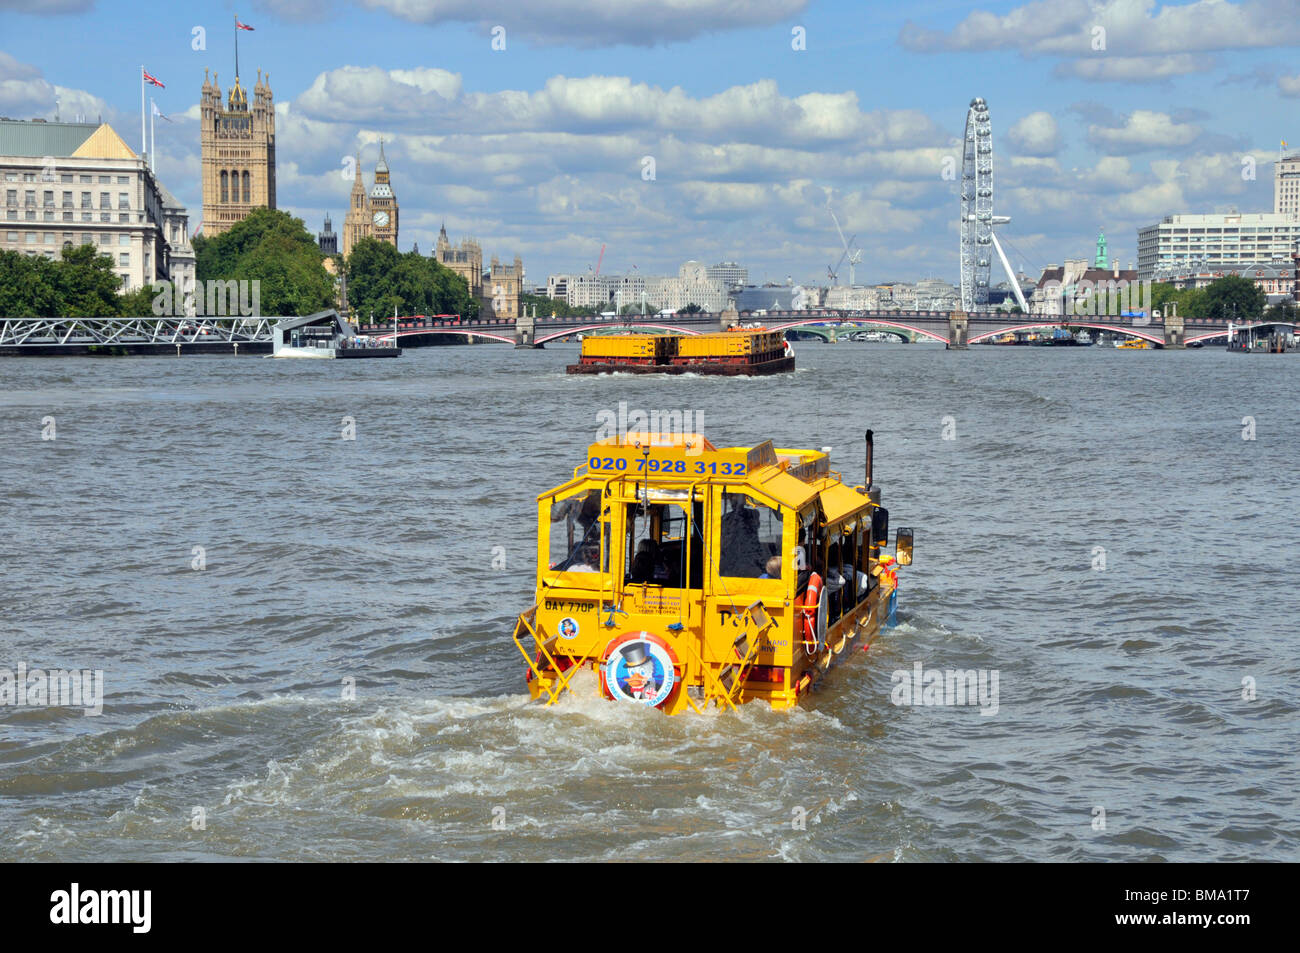 London UK business Duck Tours amphibious transport yellow sightseeing tour boat for tourist travel on River Thames to Westminster Bridge & London Eye Stock Photo